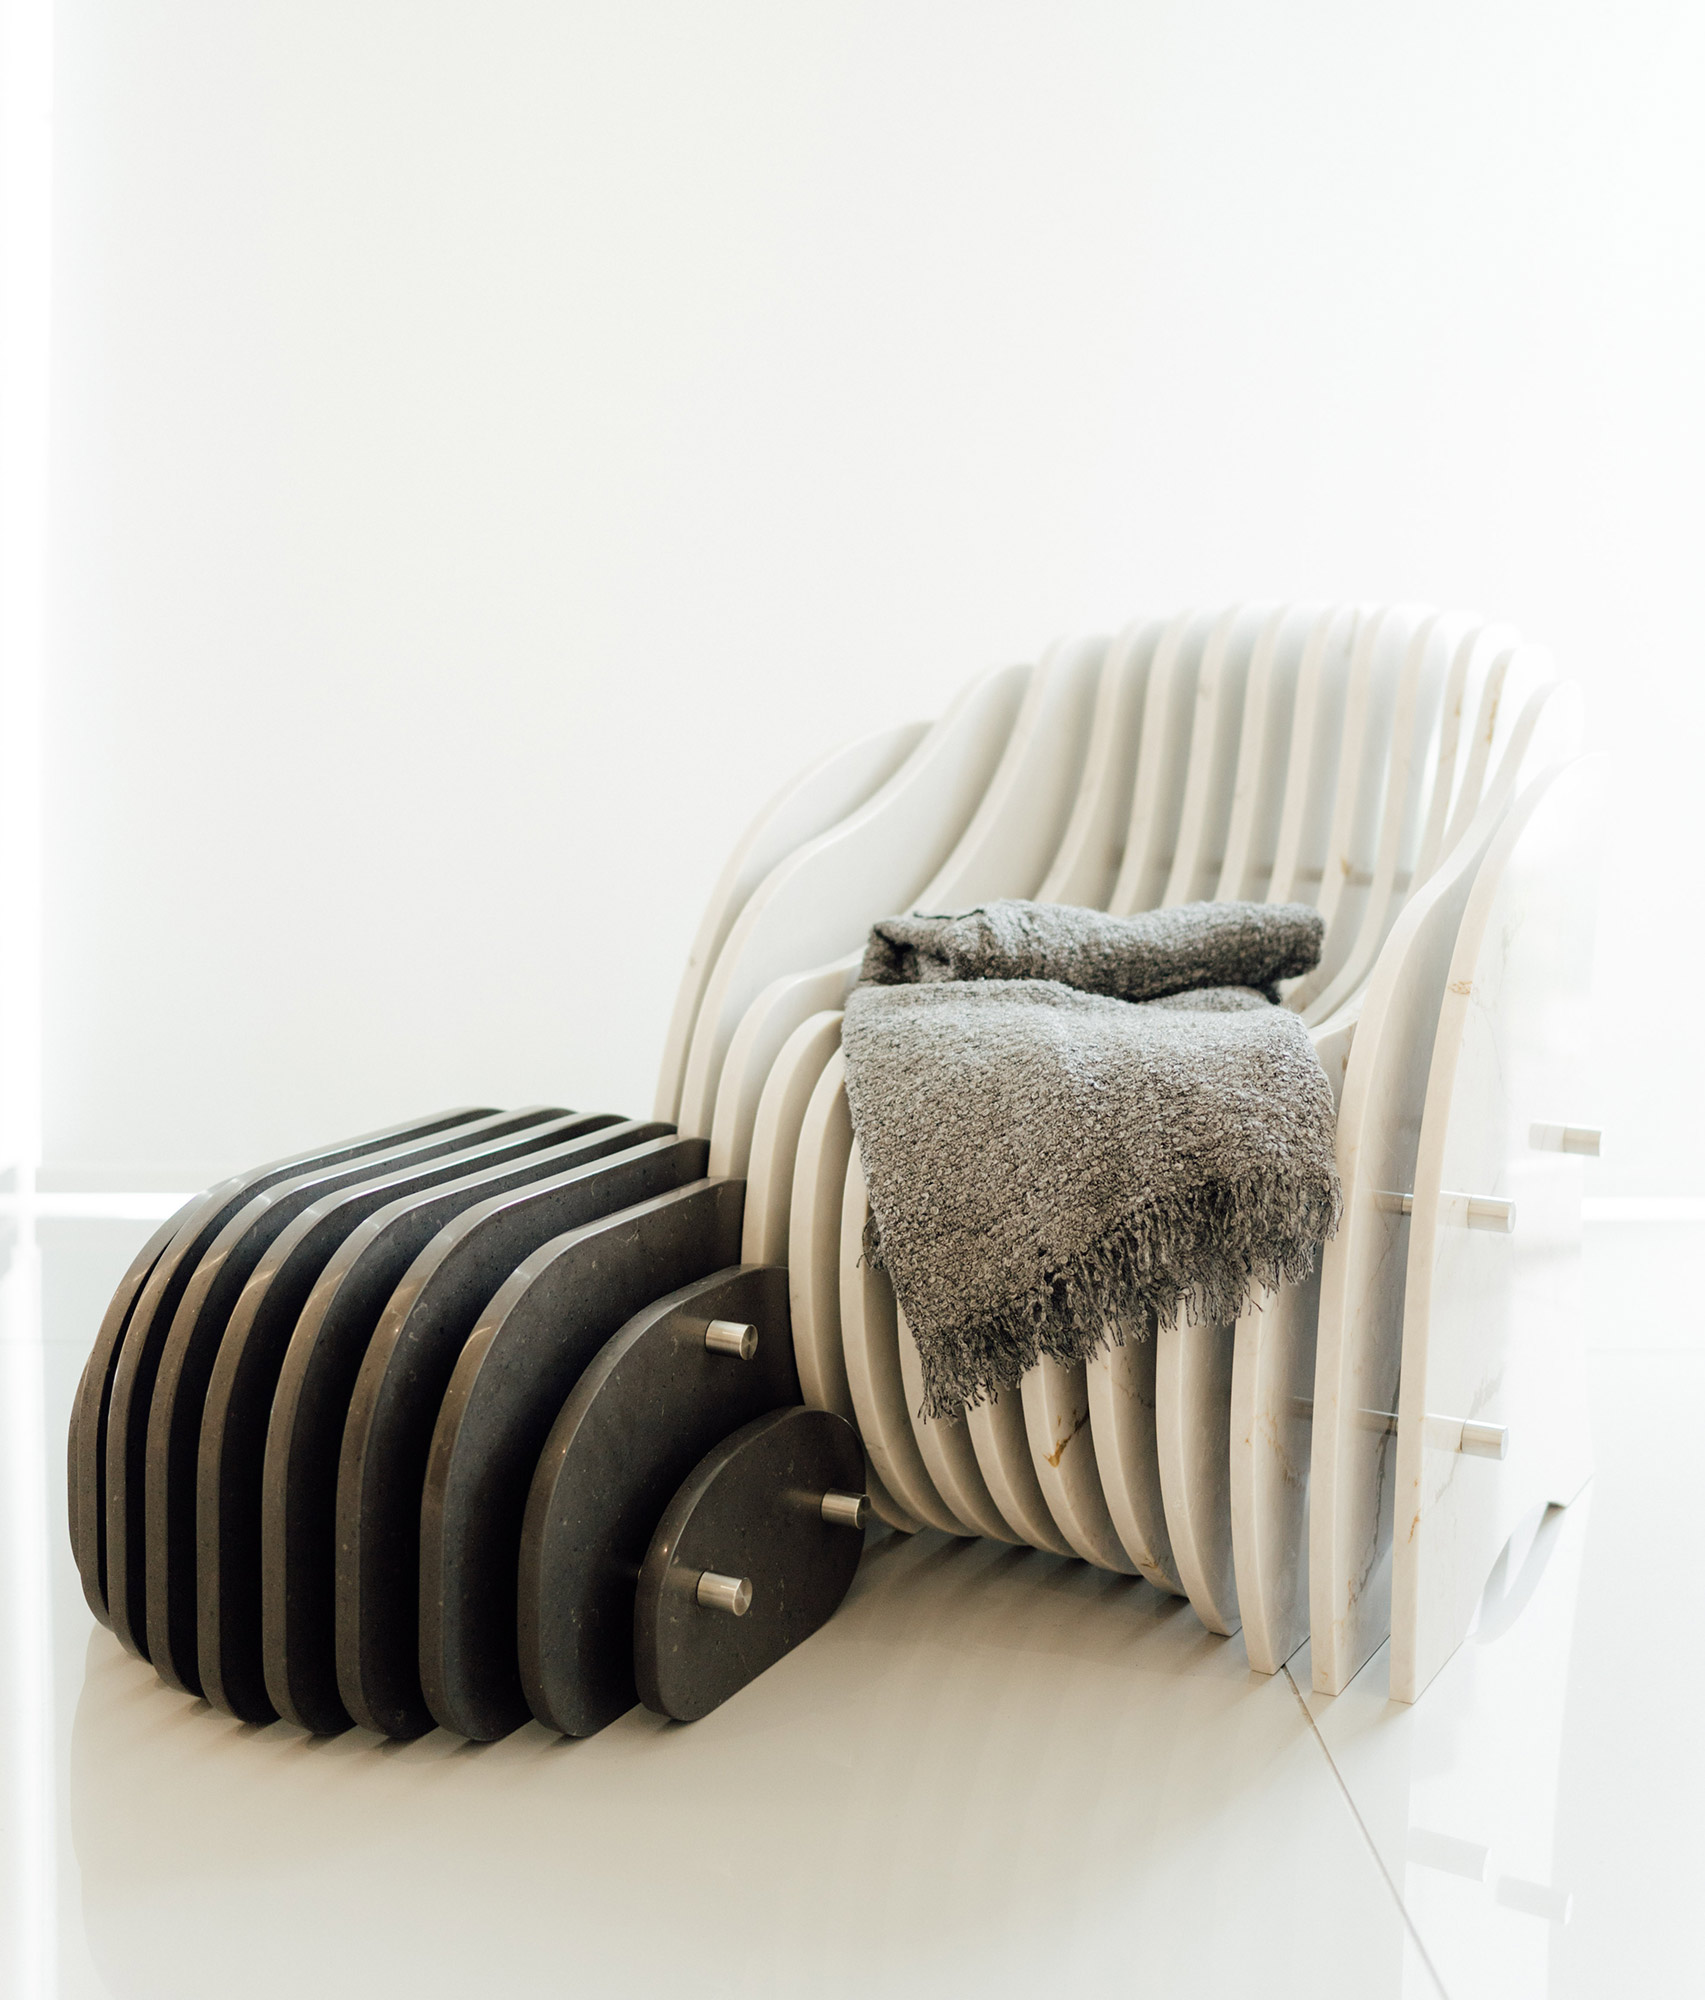 Image of The Dune Series Armchair 1 in Ette Hotel - Cosentino